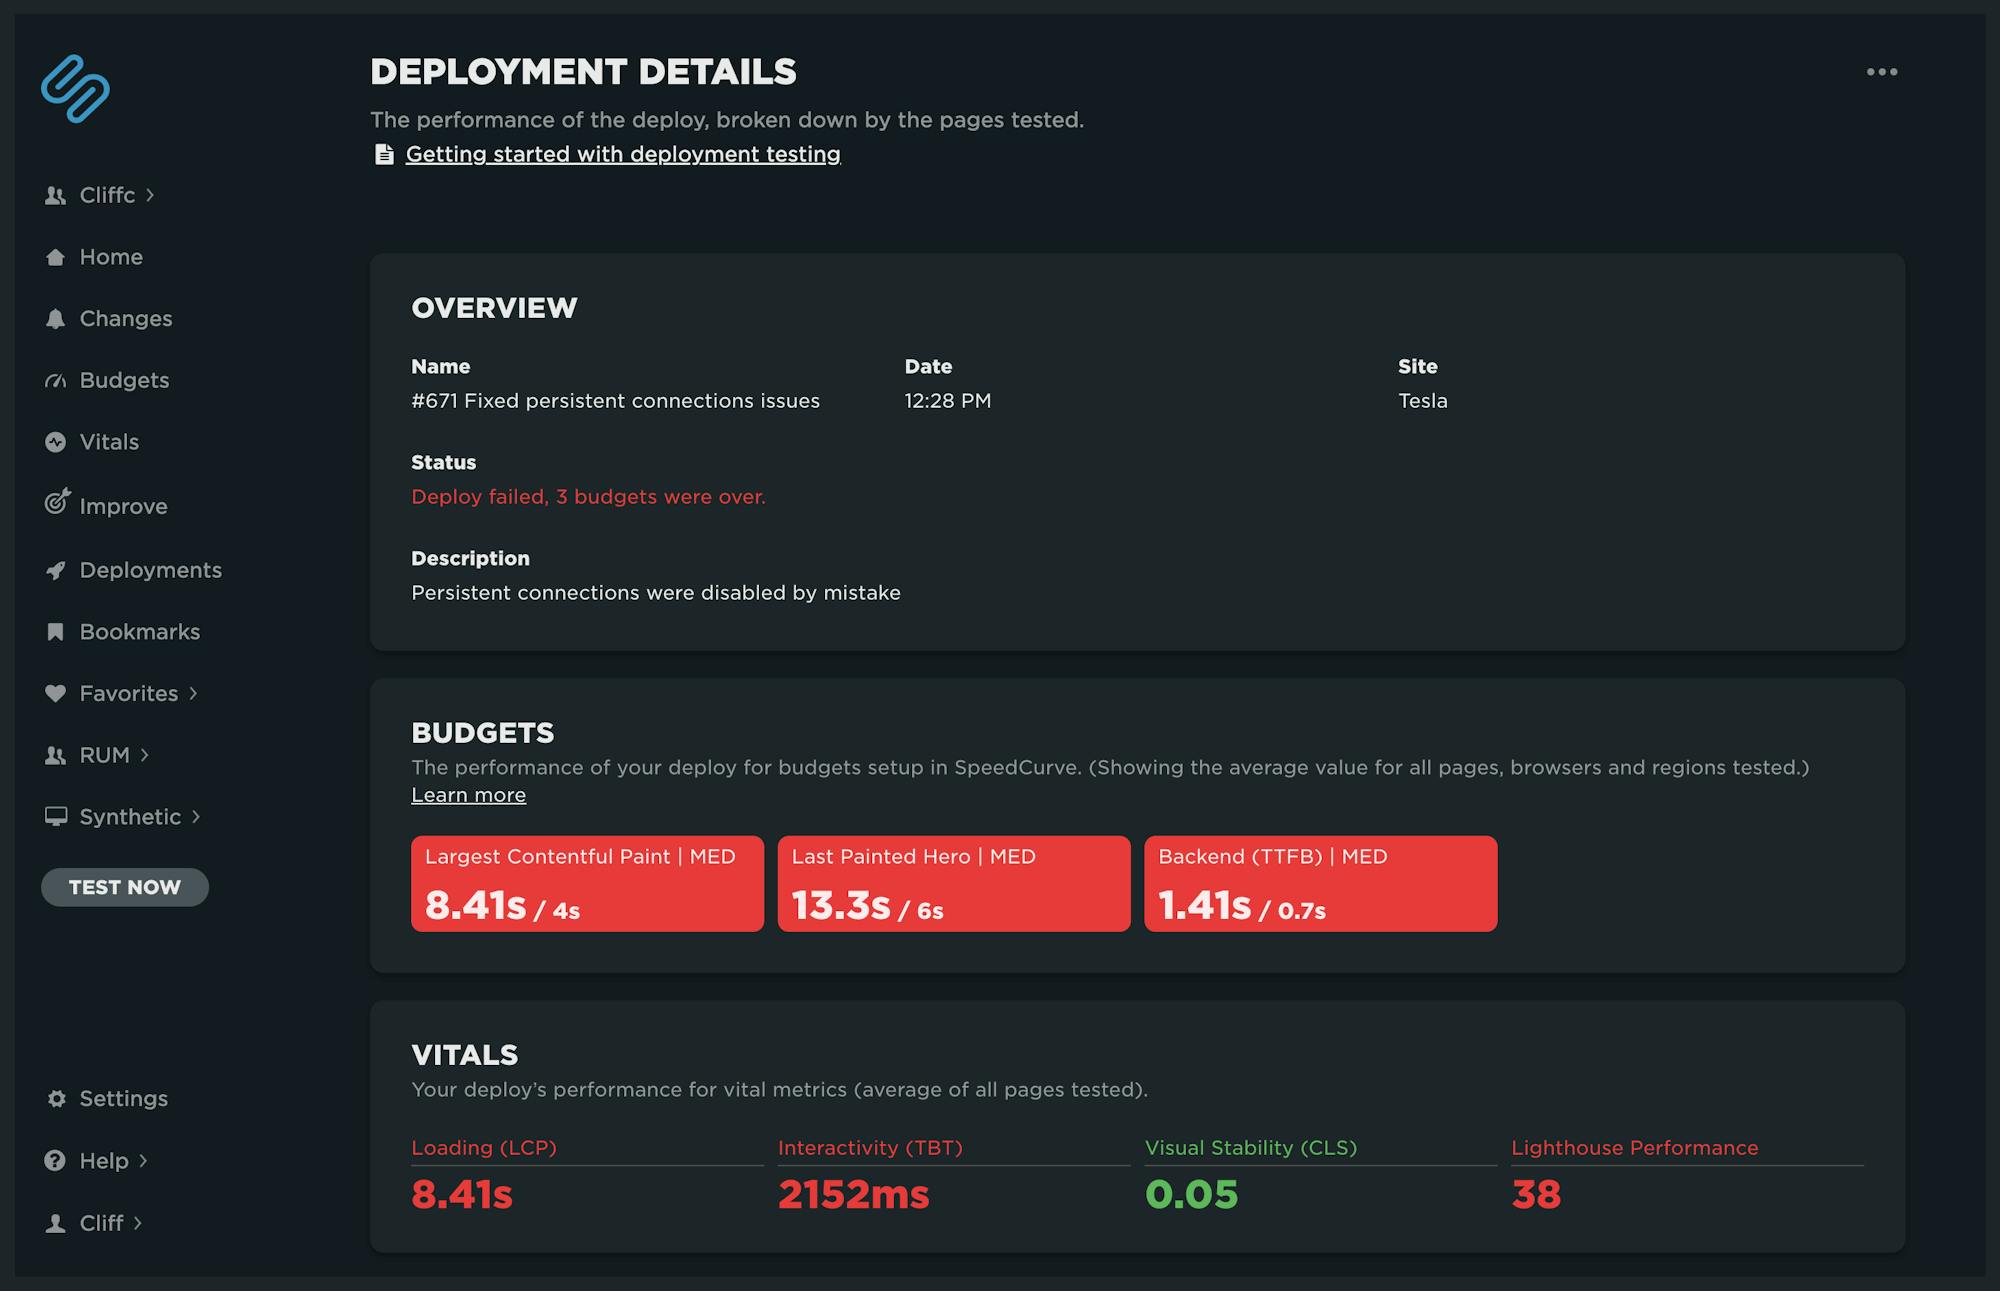 Deployment details showing failed status and overview of core web vitals